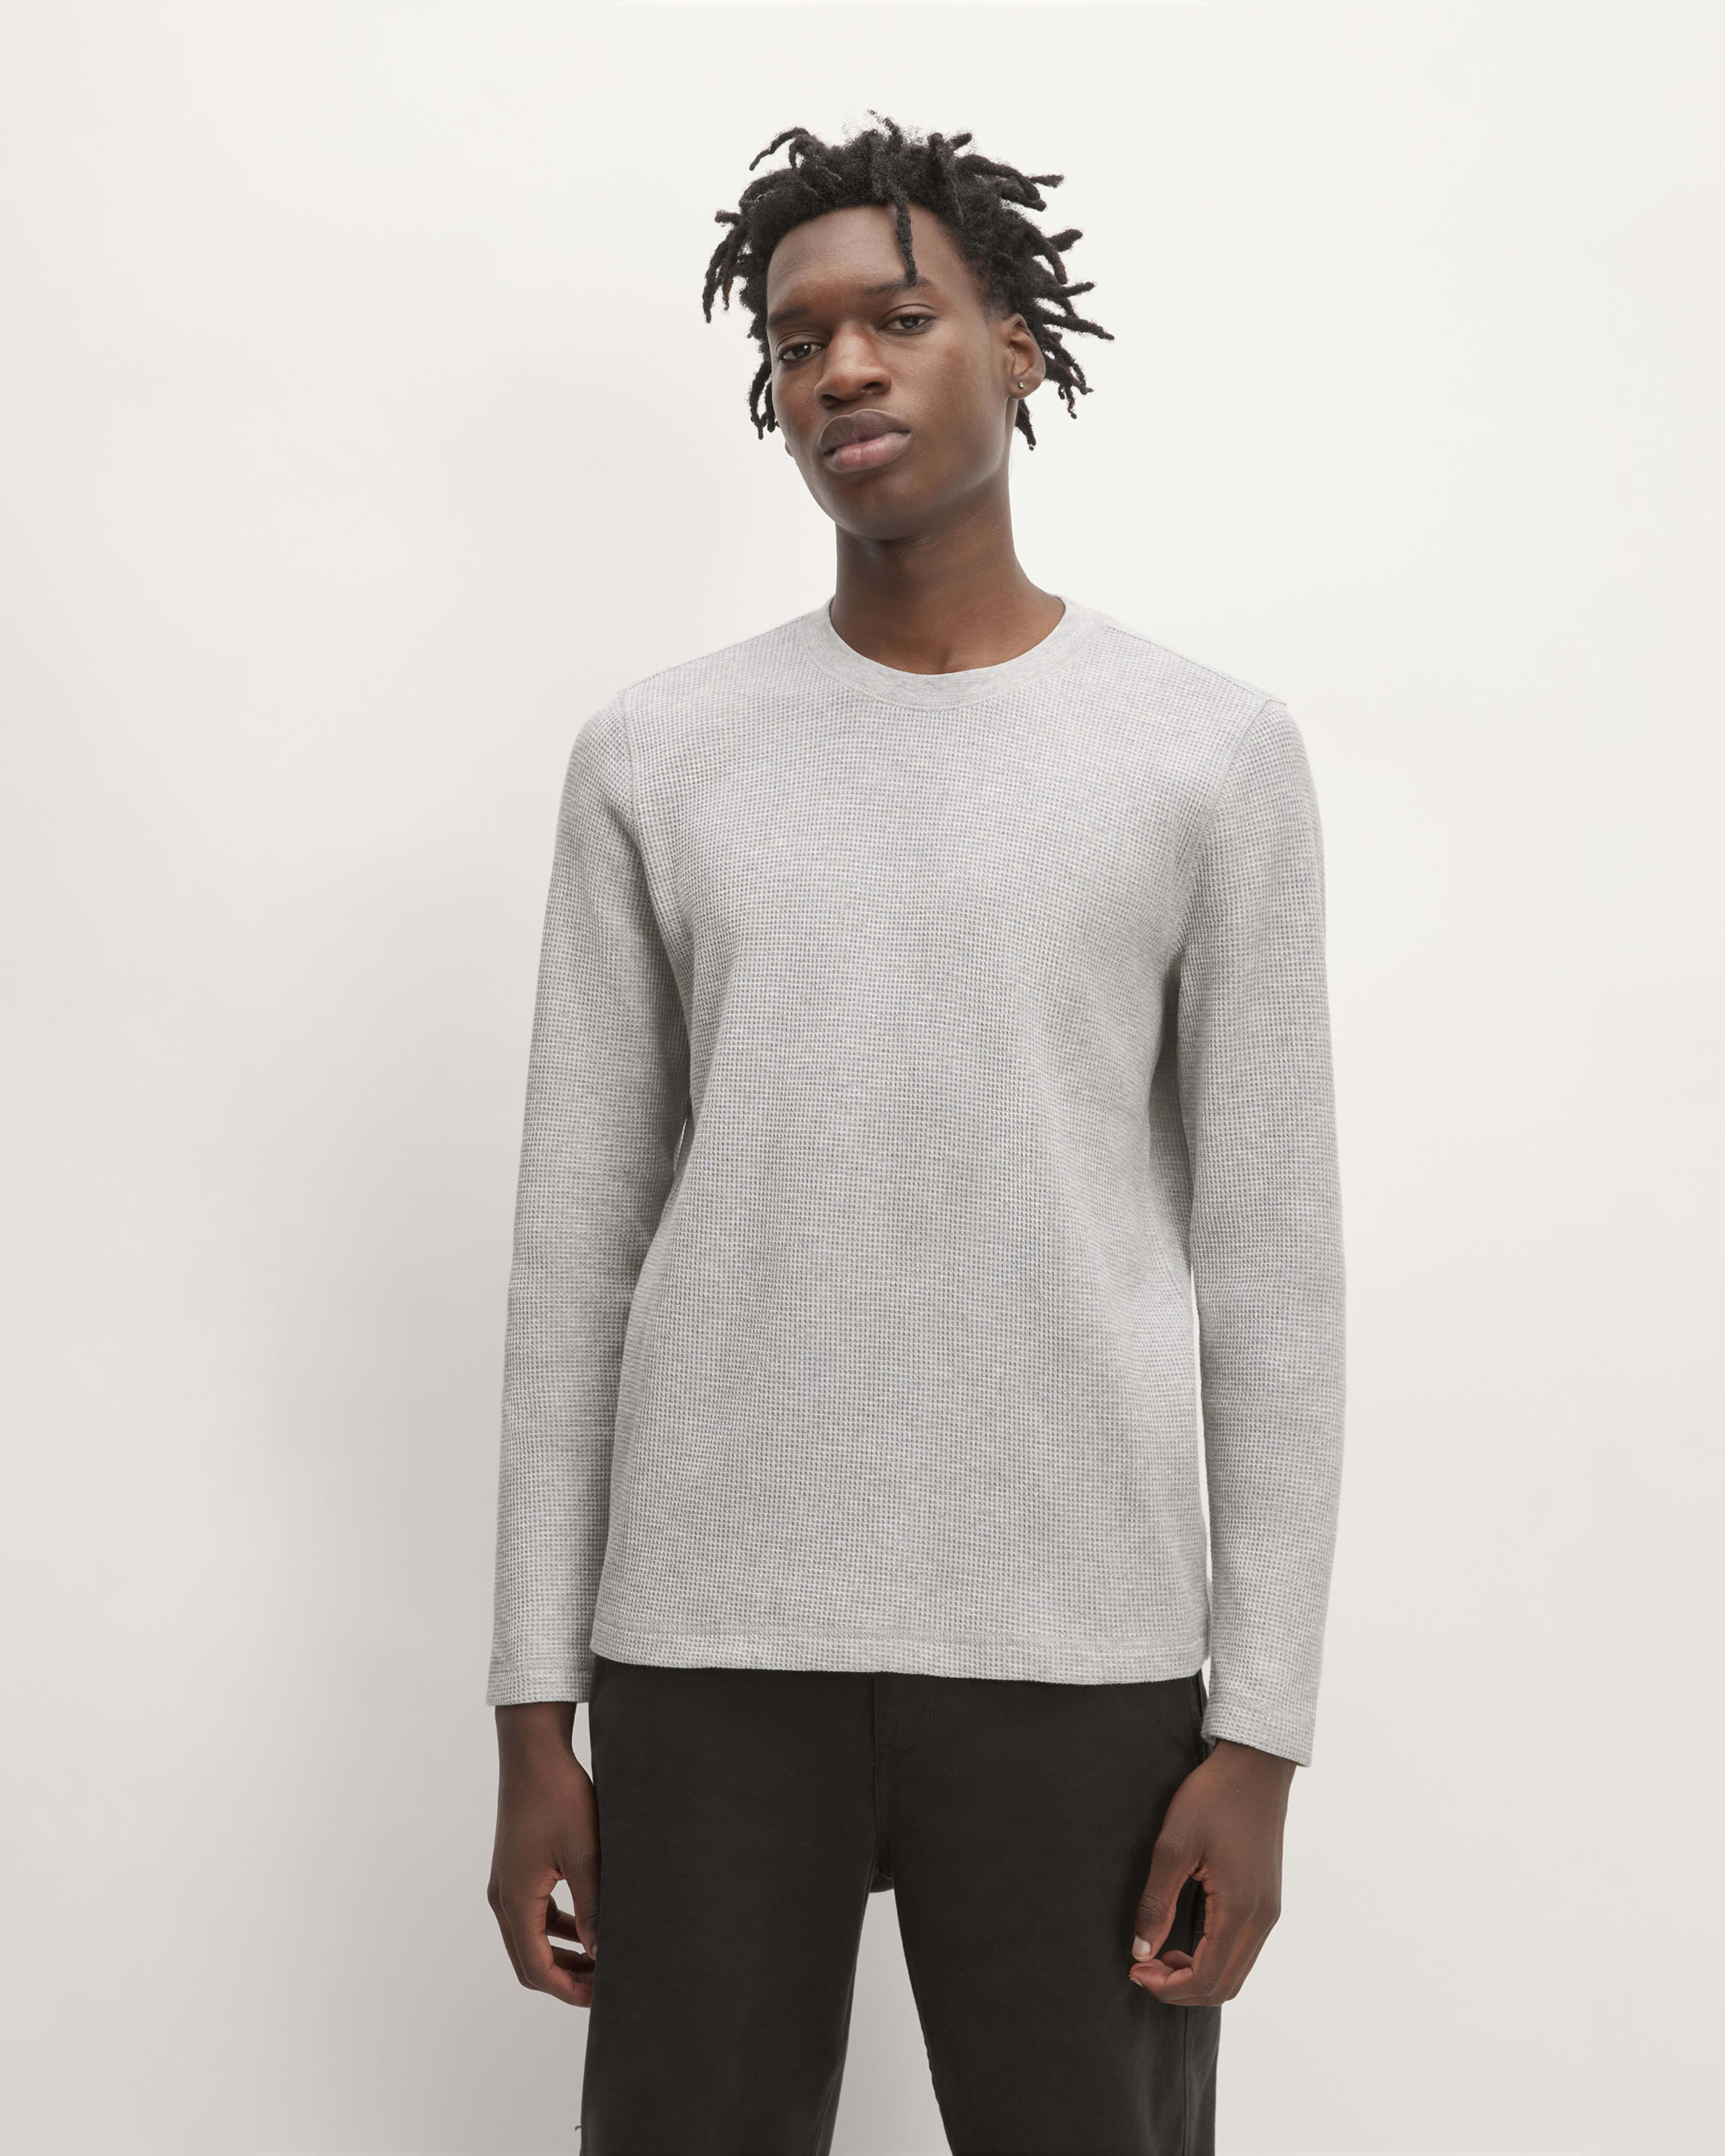 The Waffle Long-Sleeve Crew Light Grey Donegal – Everlane